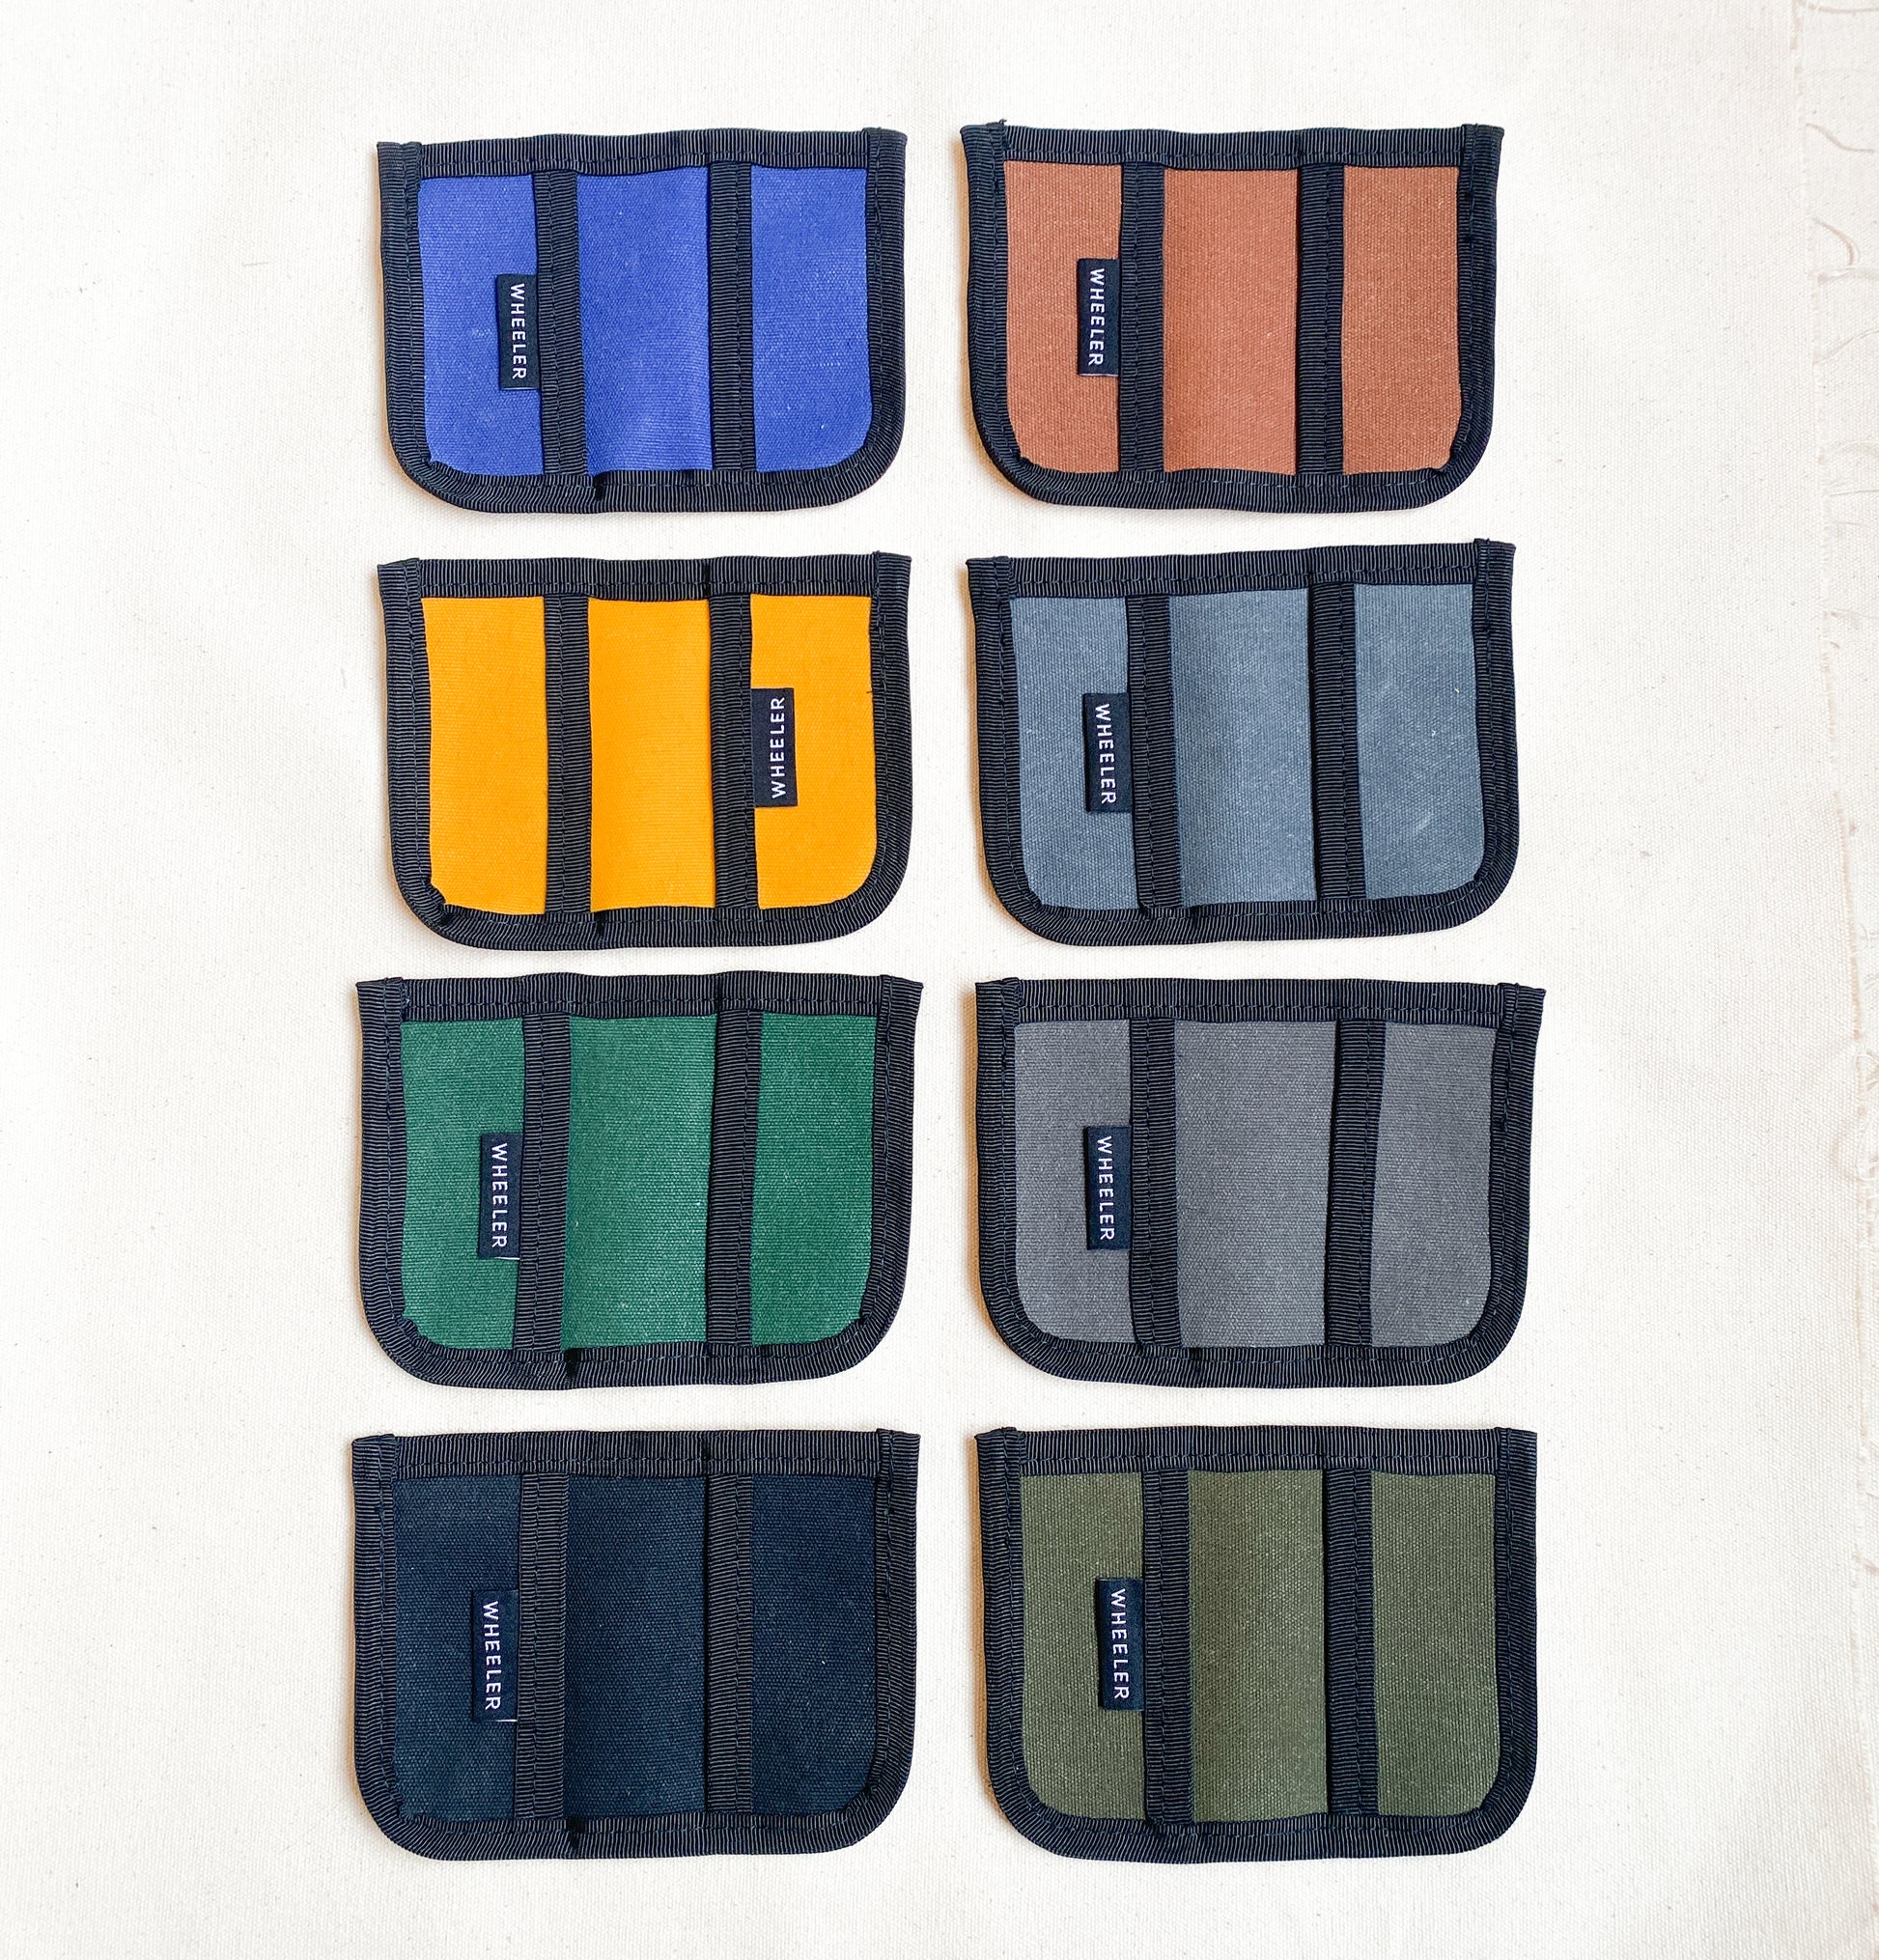 All colors available for Card Holder. 